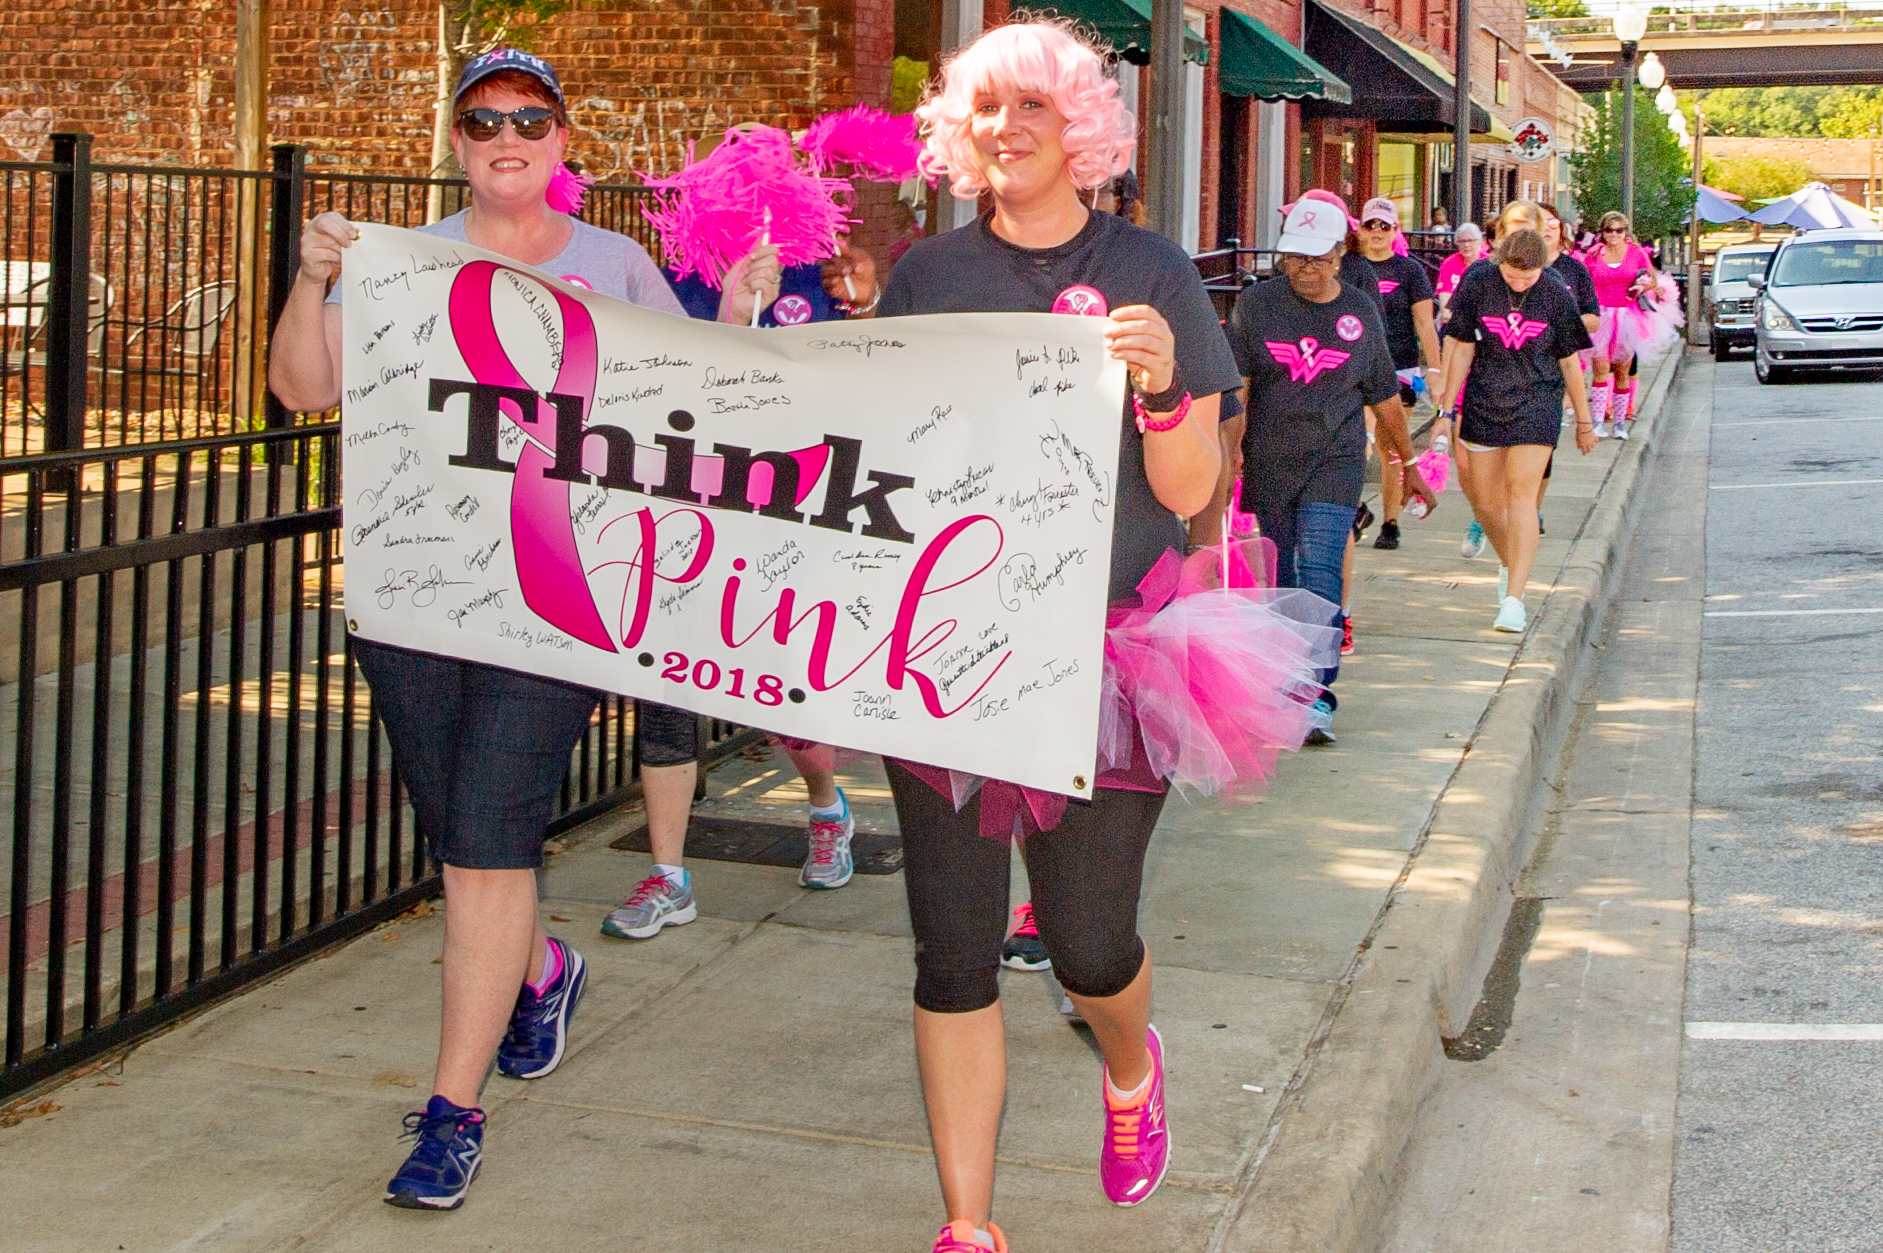 New location for this year’s Think Pink Walk